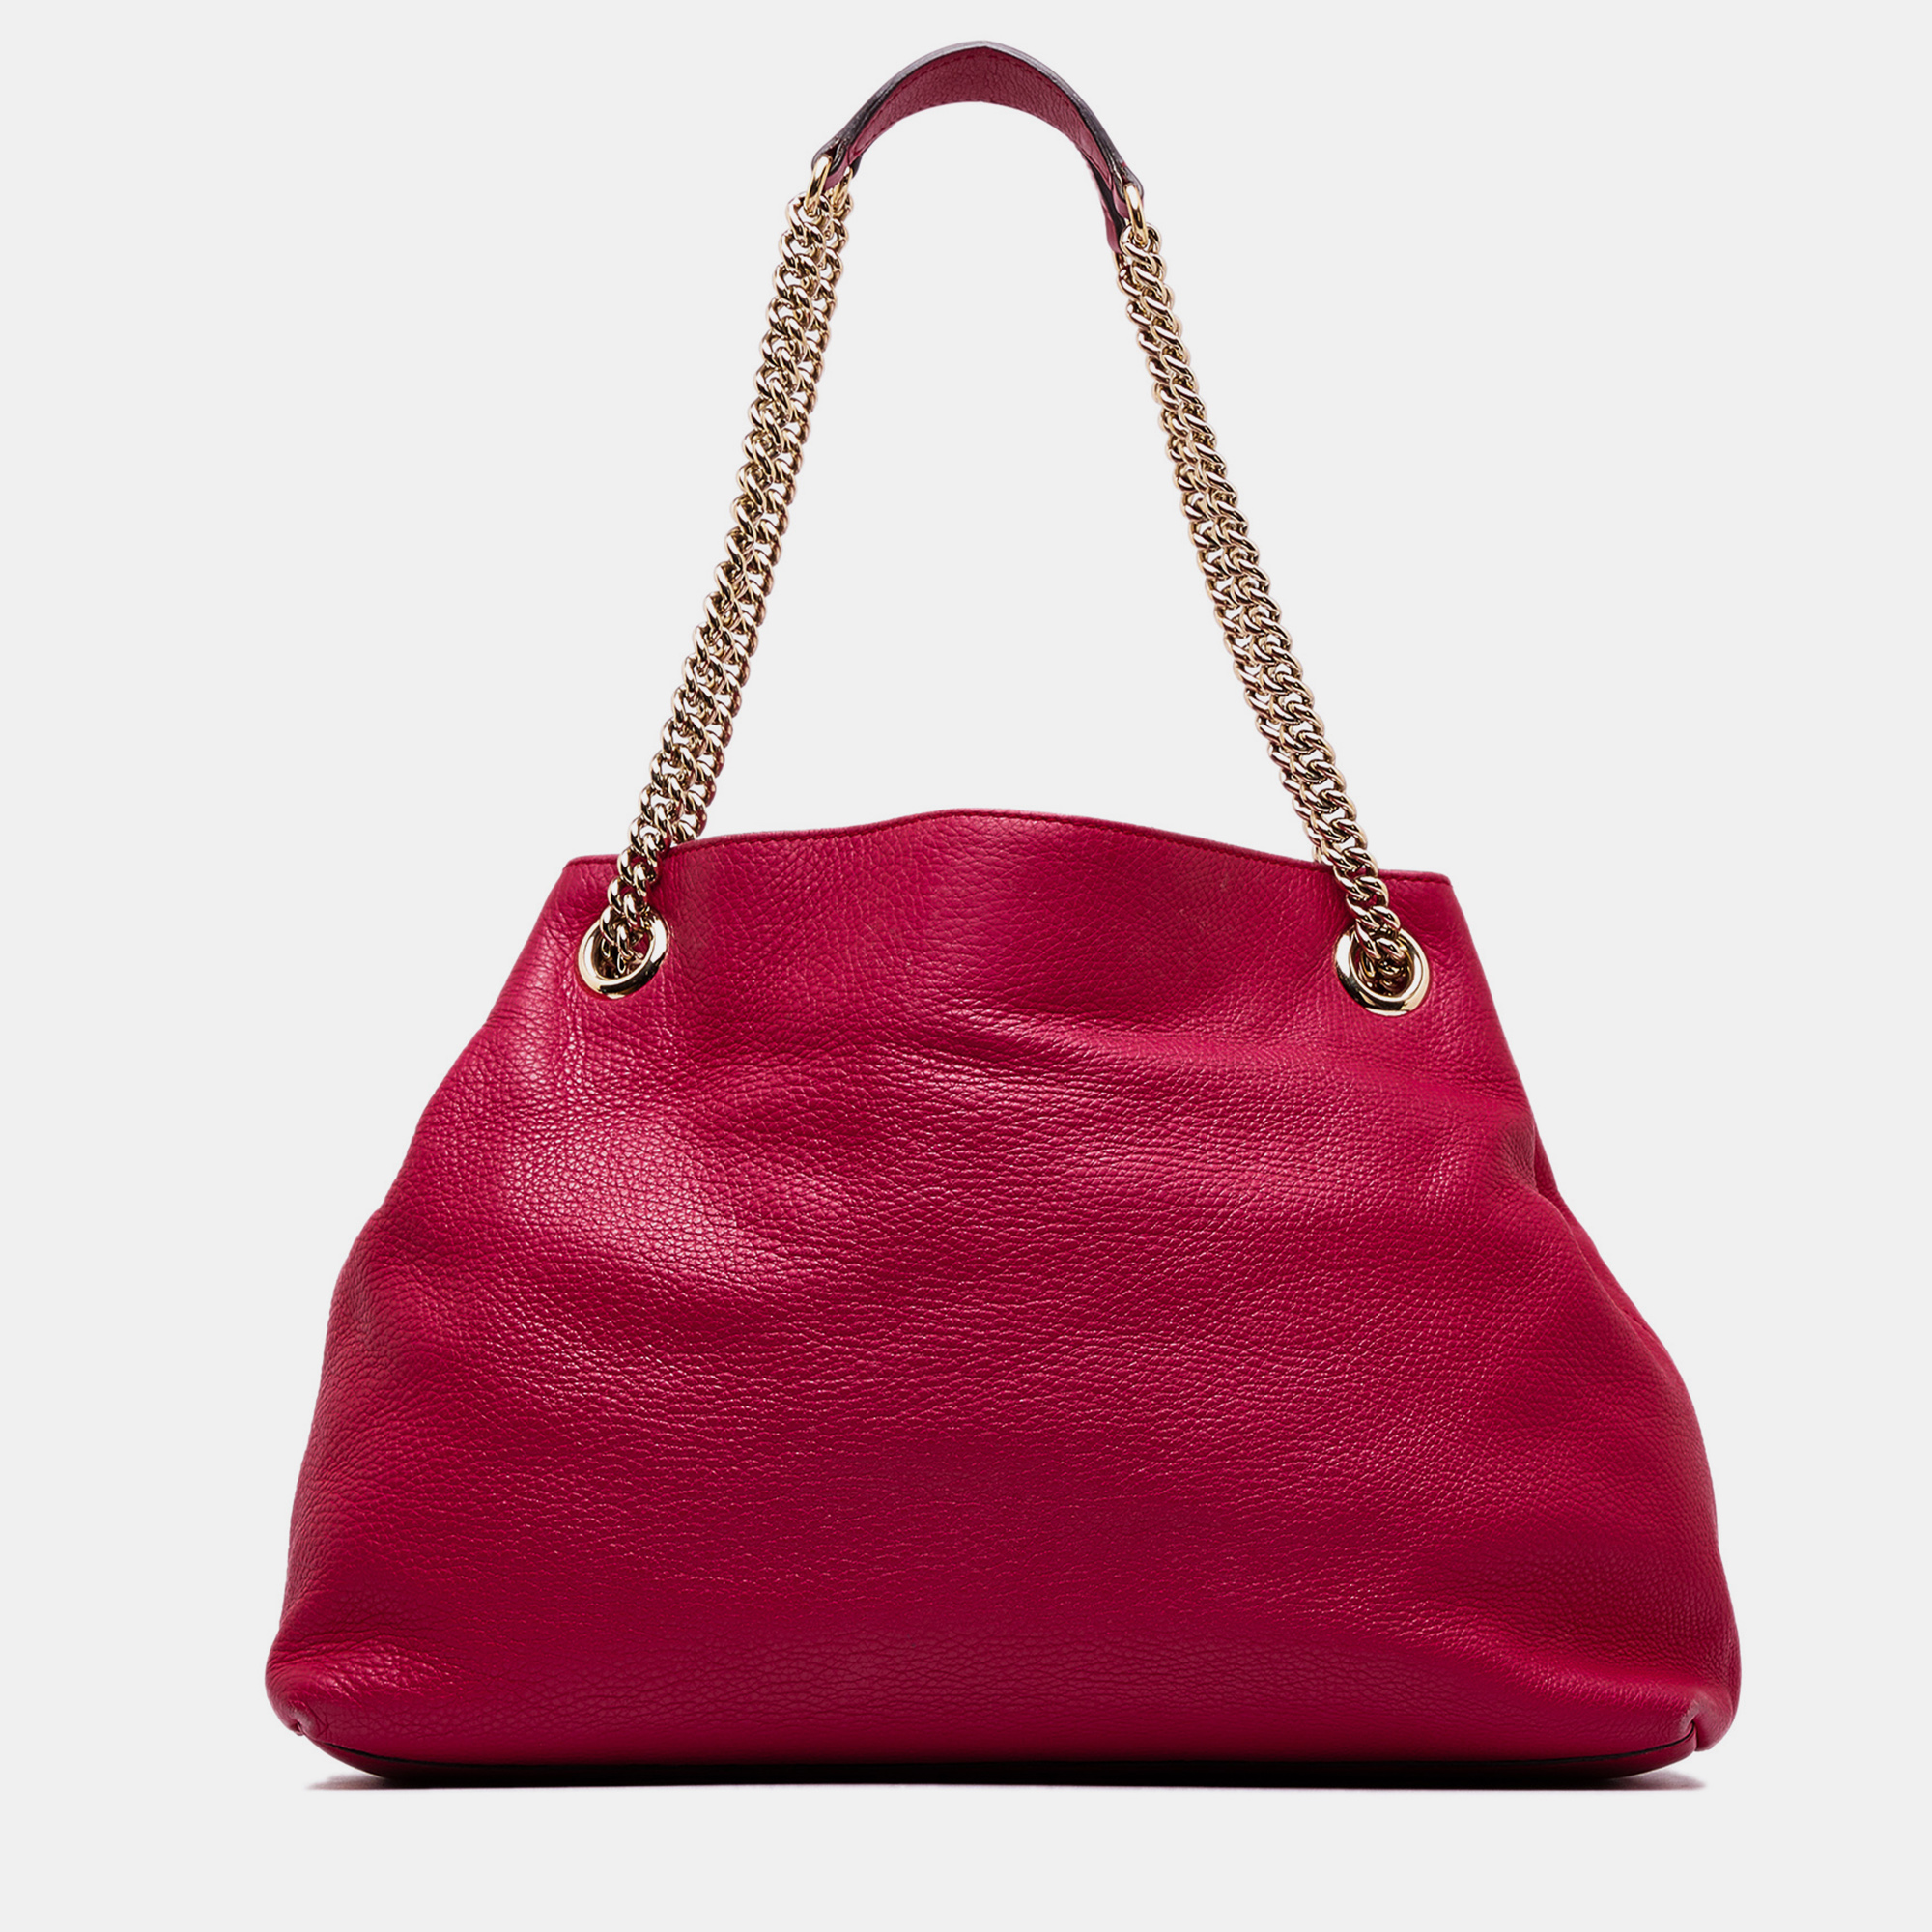 Gucci Hot Pink Leather Soho Chain Tote